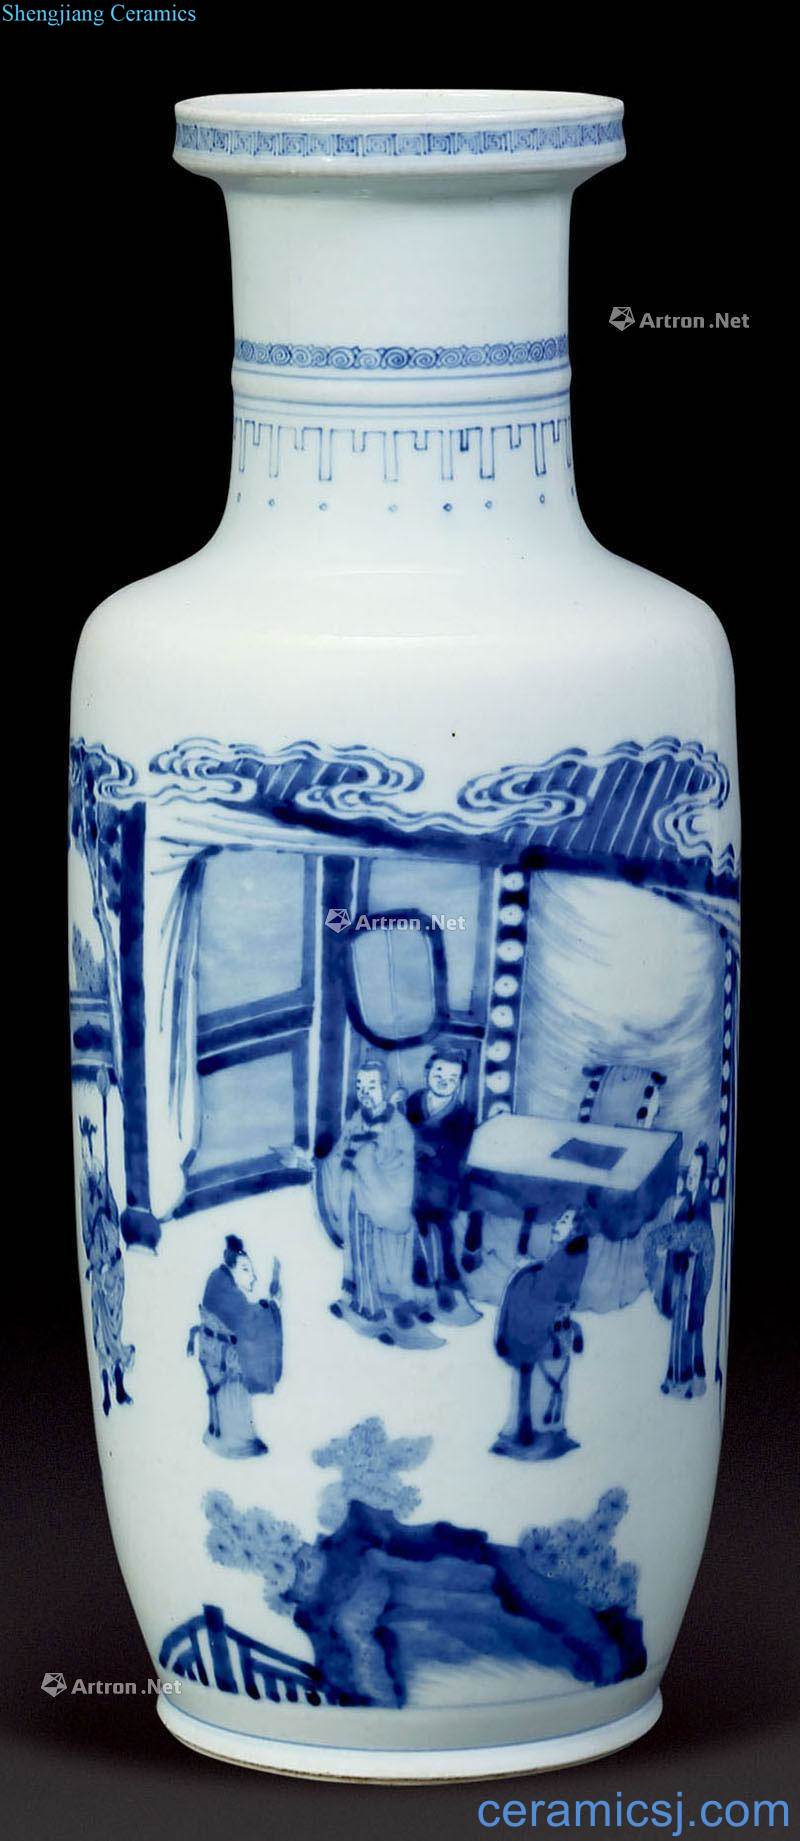 Qing dynasty blue and white characters were bottles